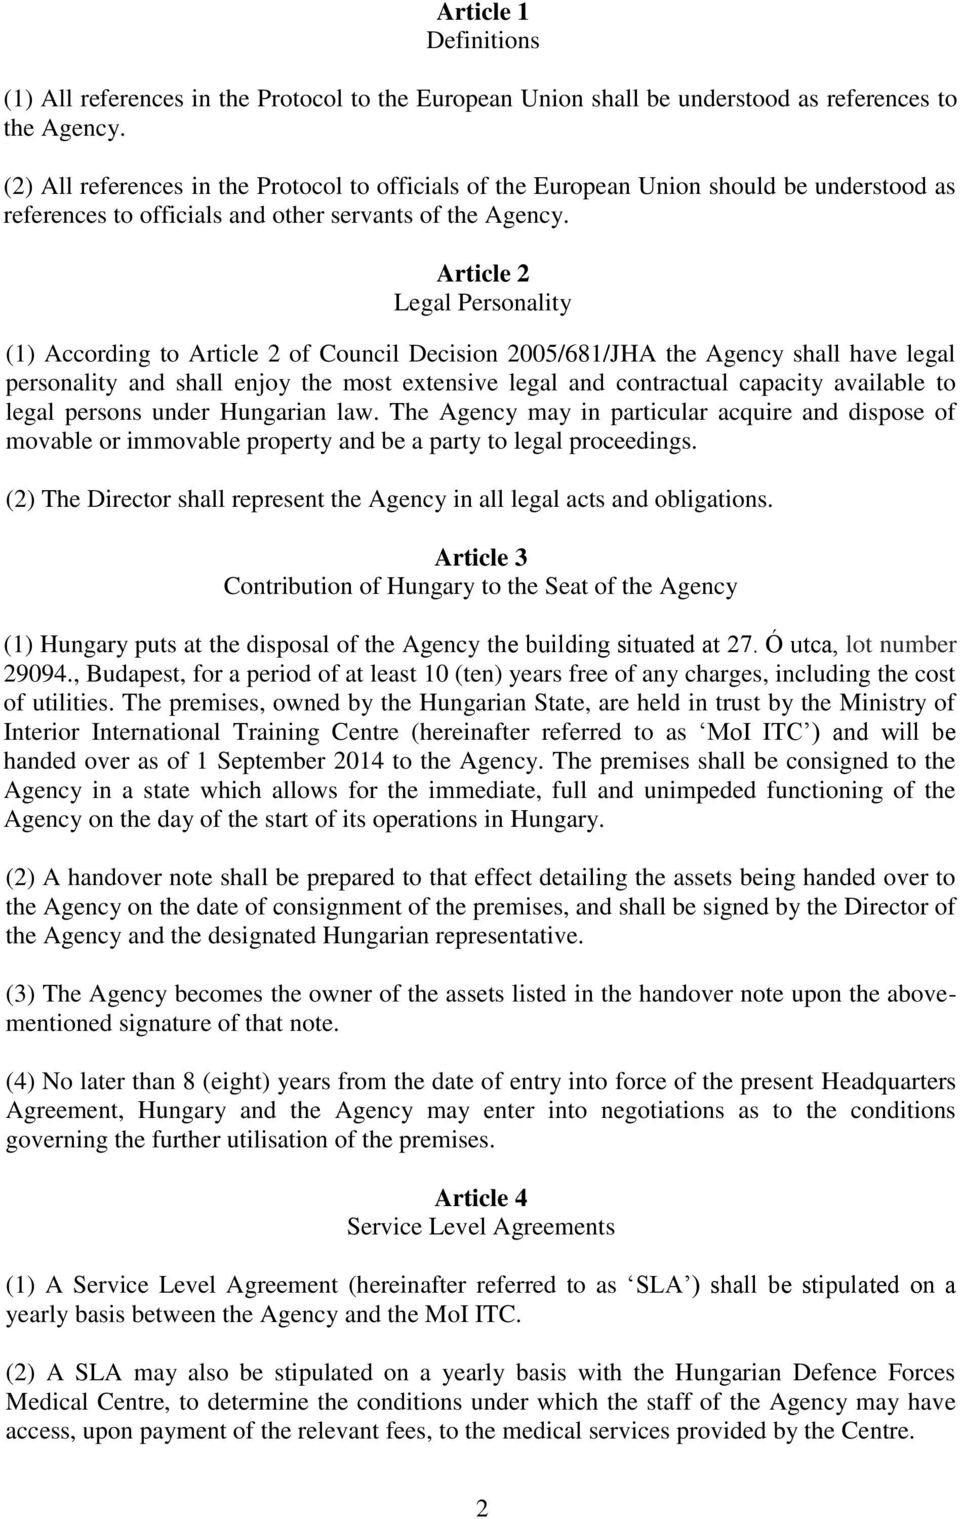 Article 2 Legal Personality (1) According to Article 2 of Council Decision 2005/681/JHA the Agency shall have legal personality and shall enjoy the most extensive legal and contractual capacity